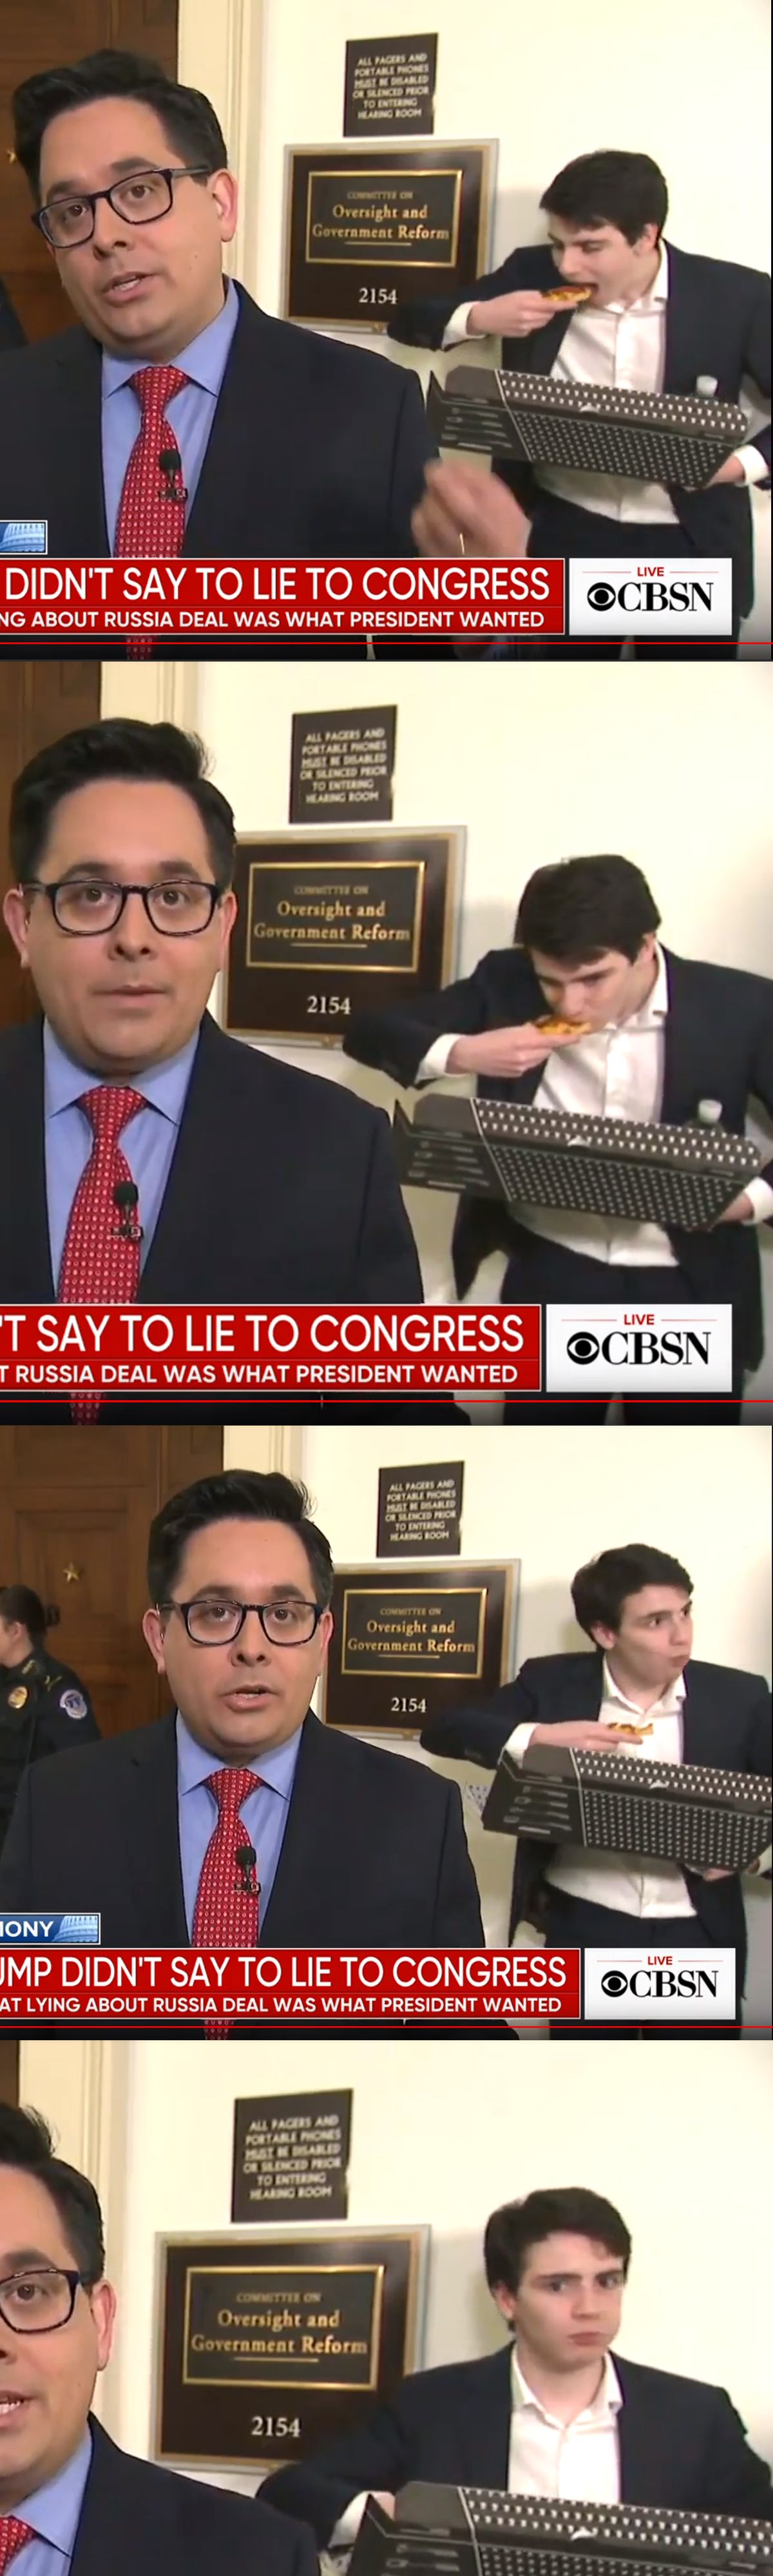 This congressional staffer caught eating pizza live on national TV.